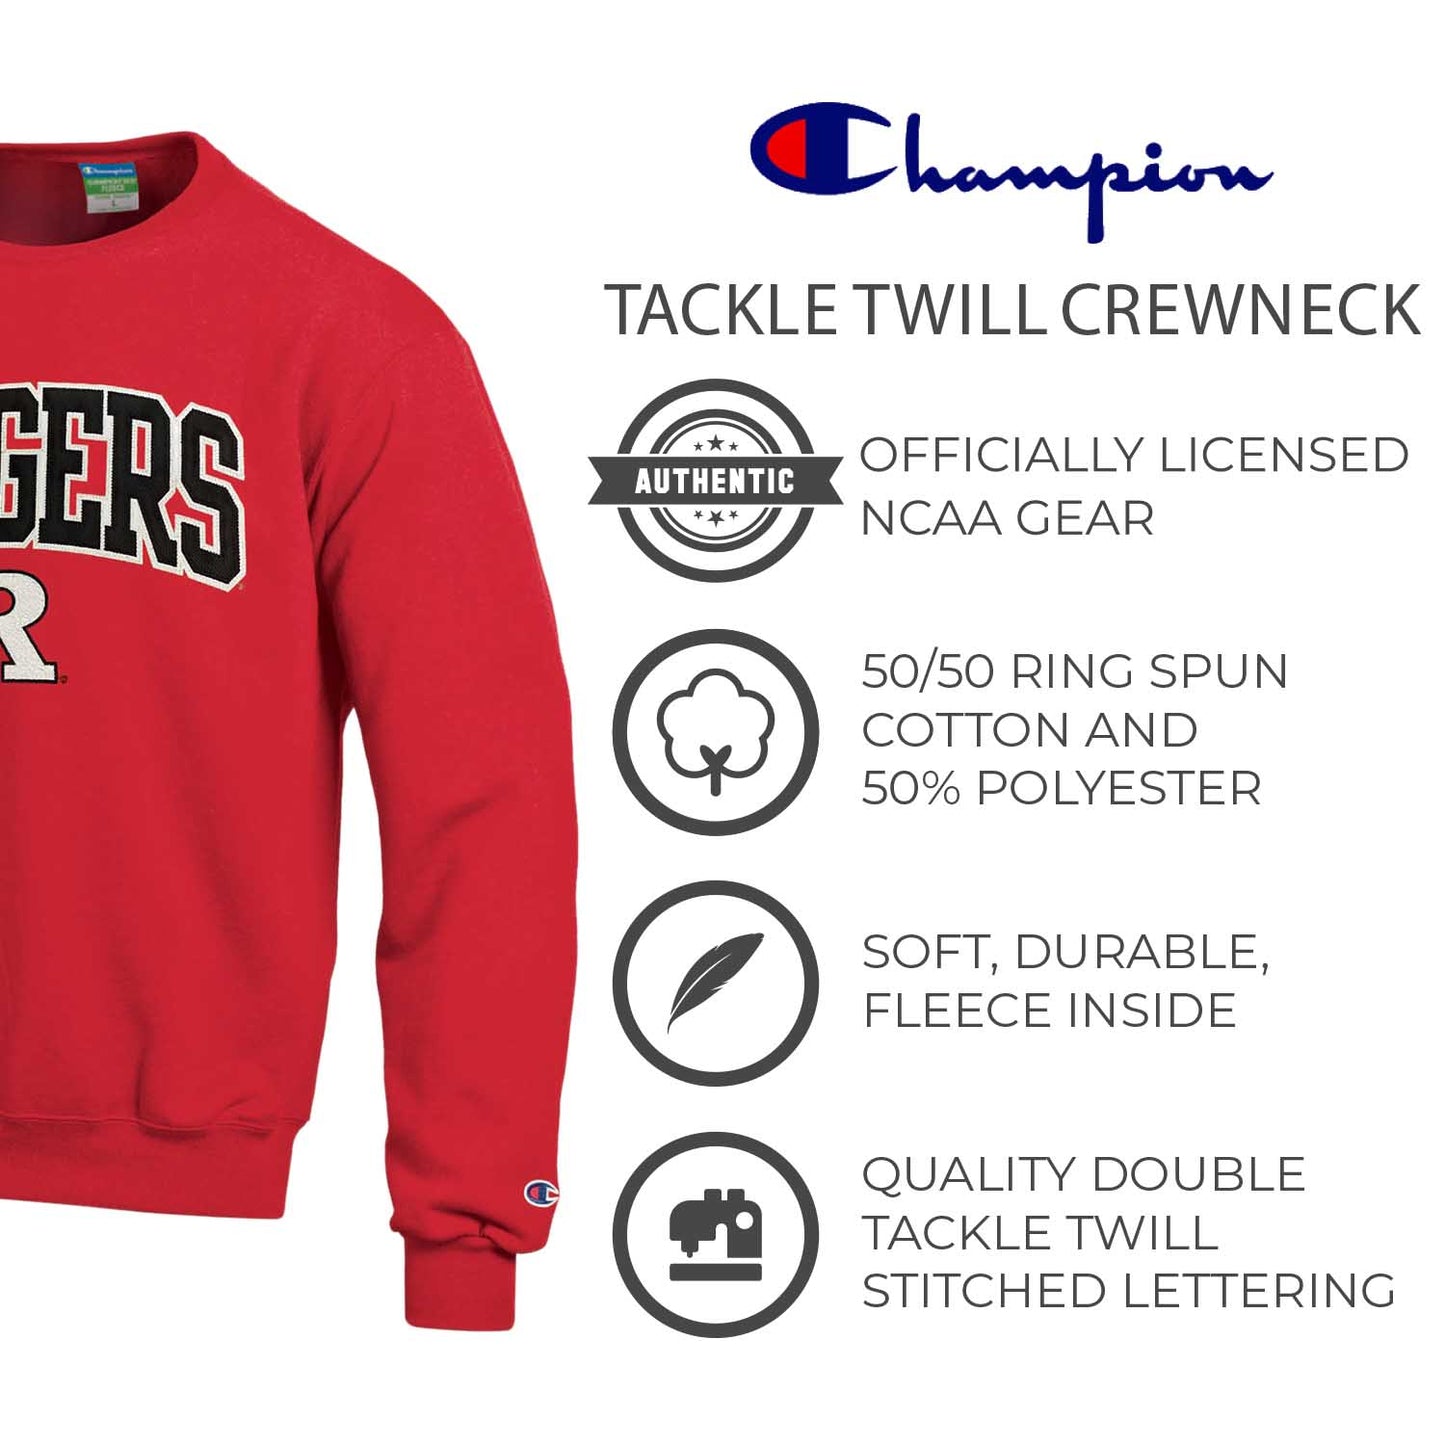 Rutgers Scarlet Knights Adult Tackle Twill Crewneck - Red